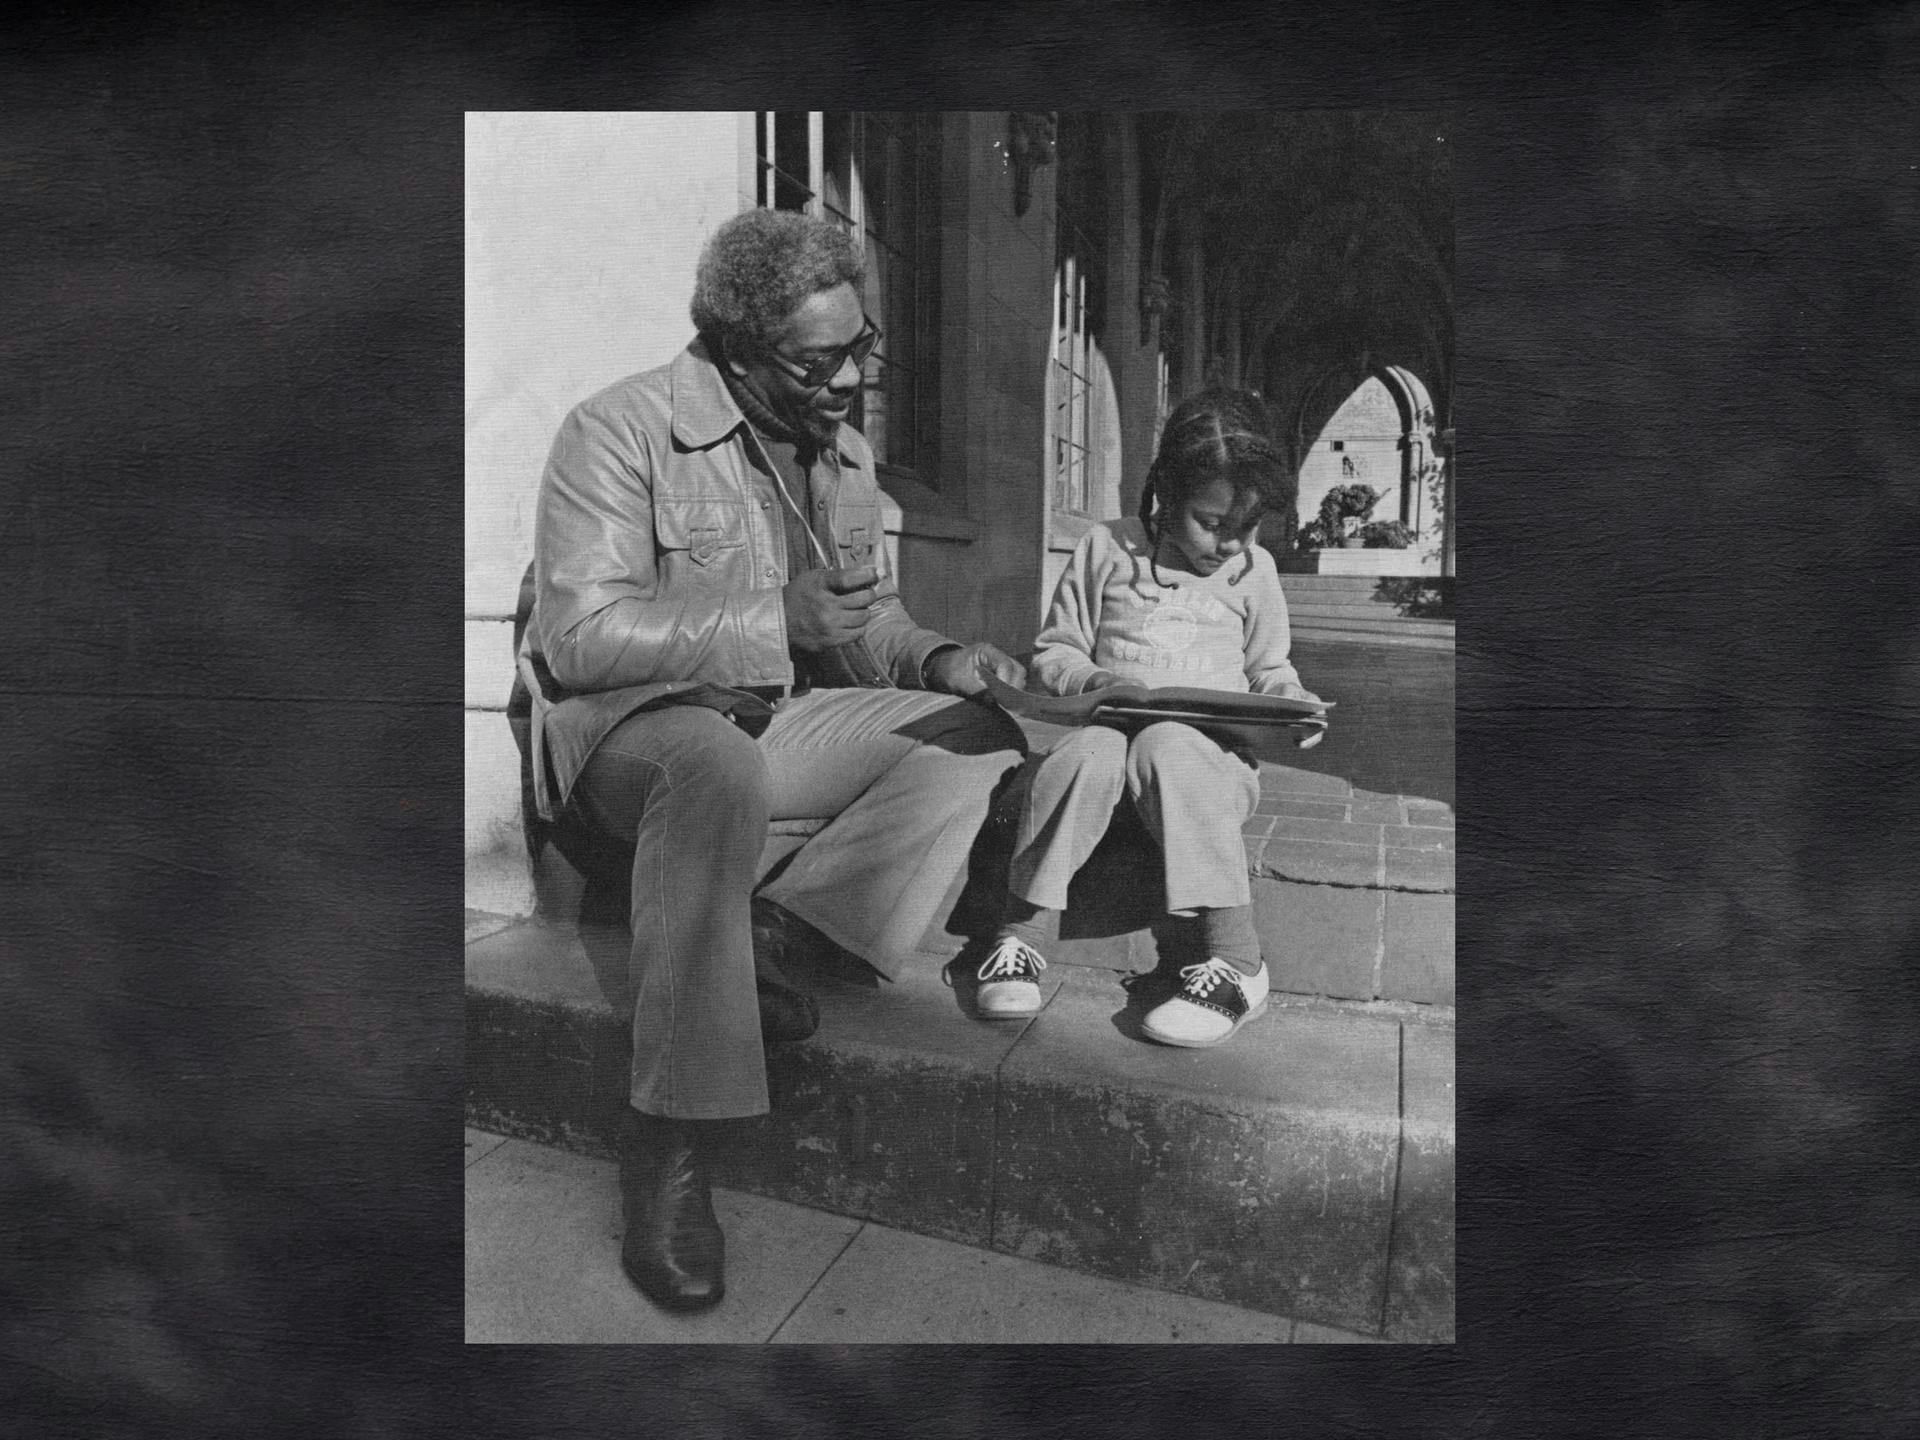 A black and white vintage photo of a man sitting with a girl on steps; he appears to be reading with her